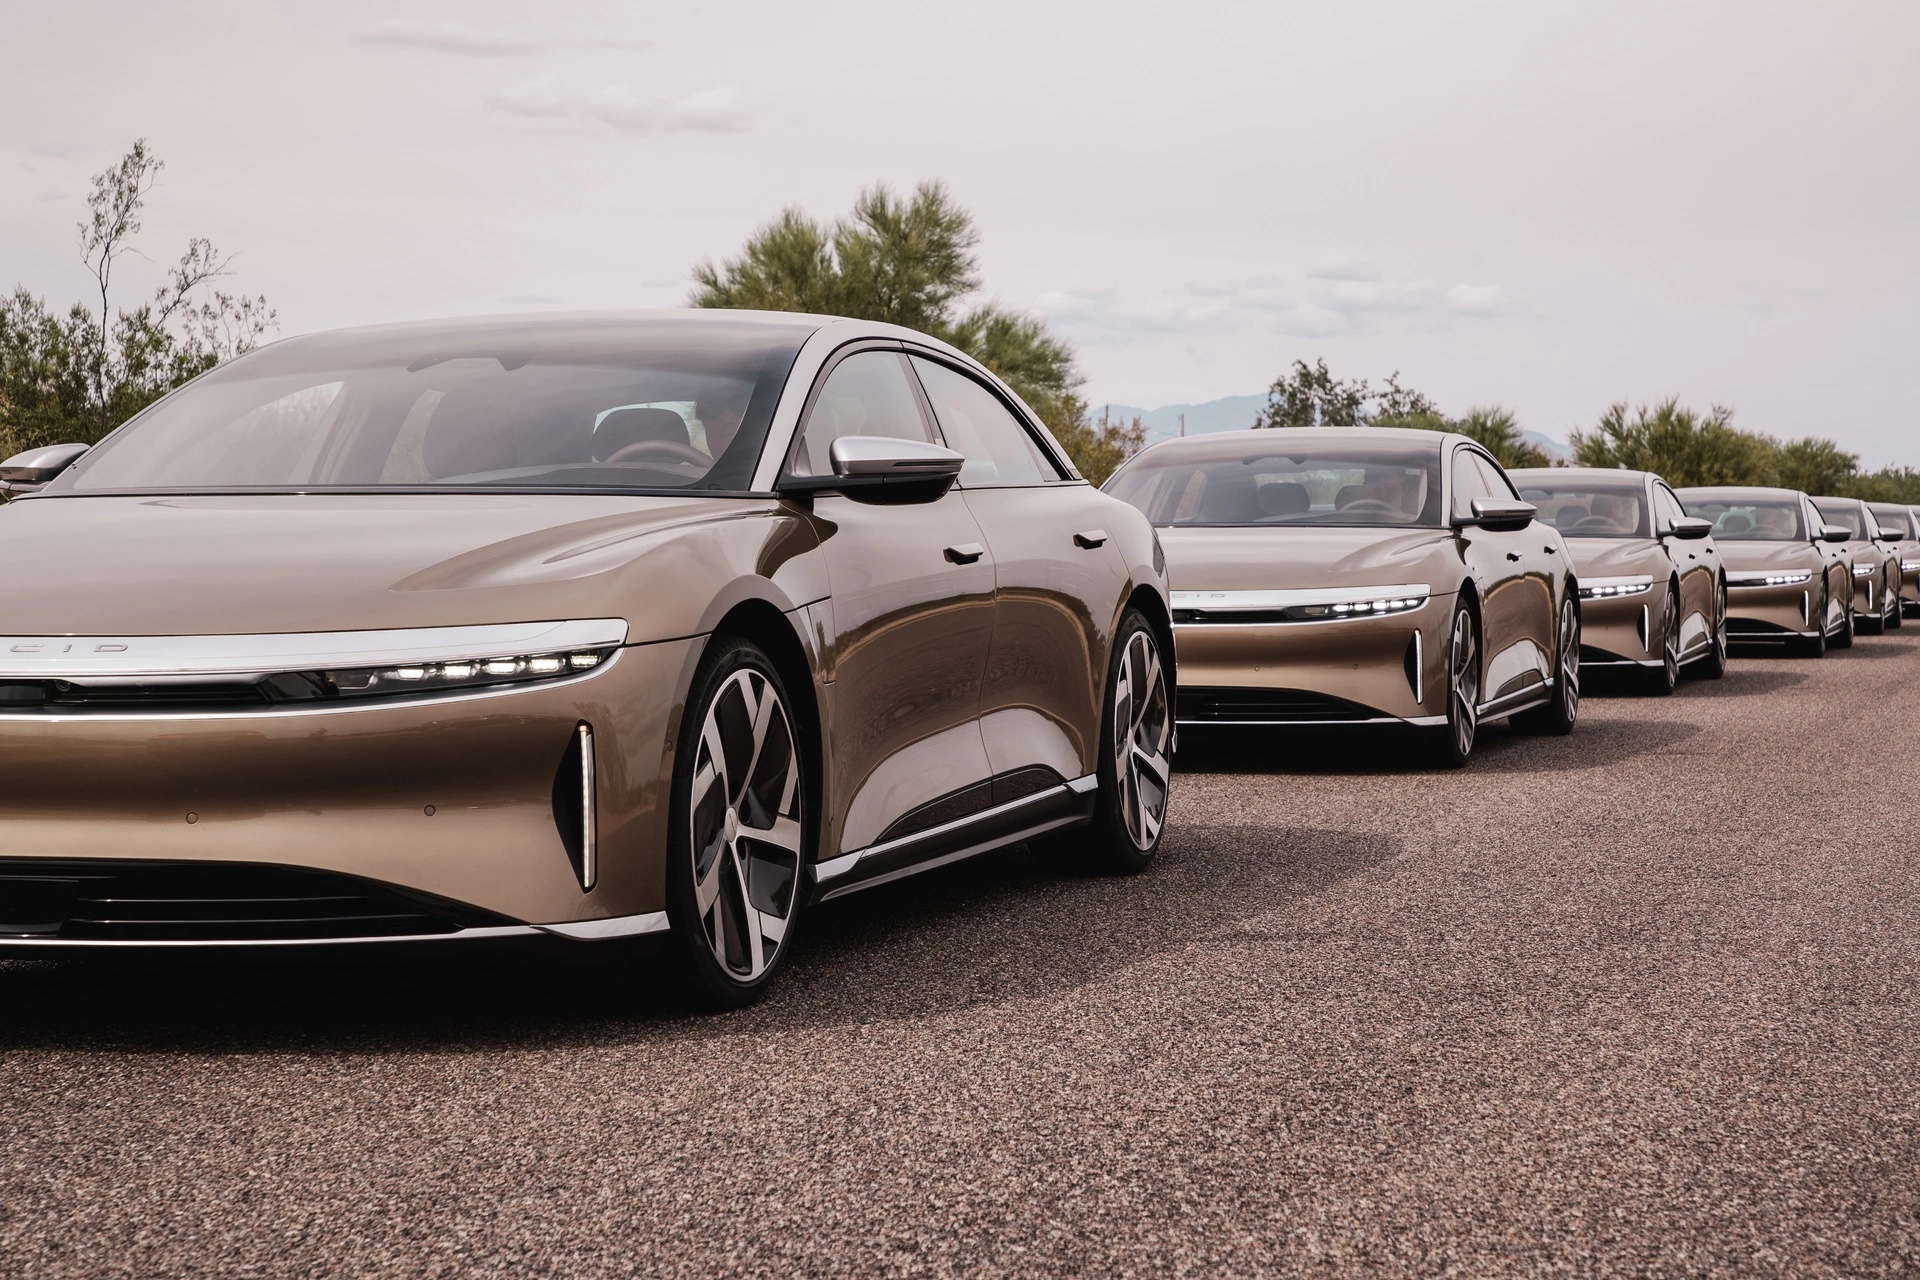 Lucid Air Electric Vehicle Registration Shows At Least 60 In NY, 43 In Washington, 17 In Colorado & More